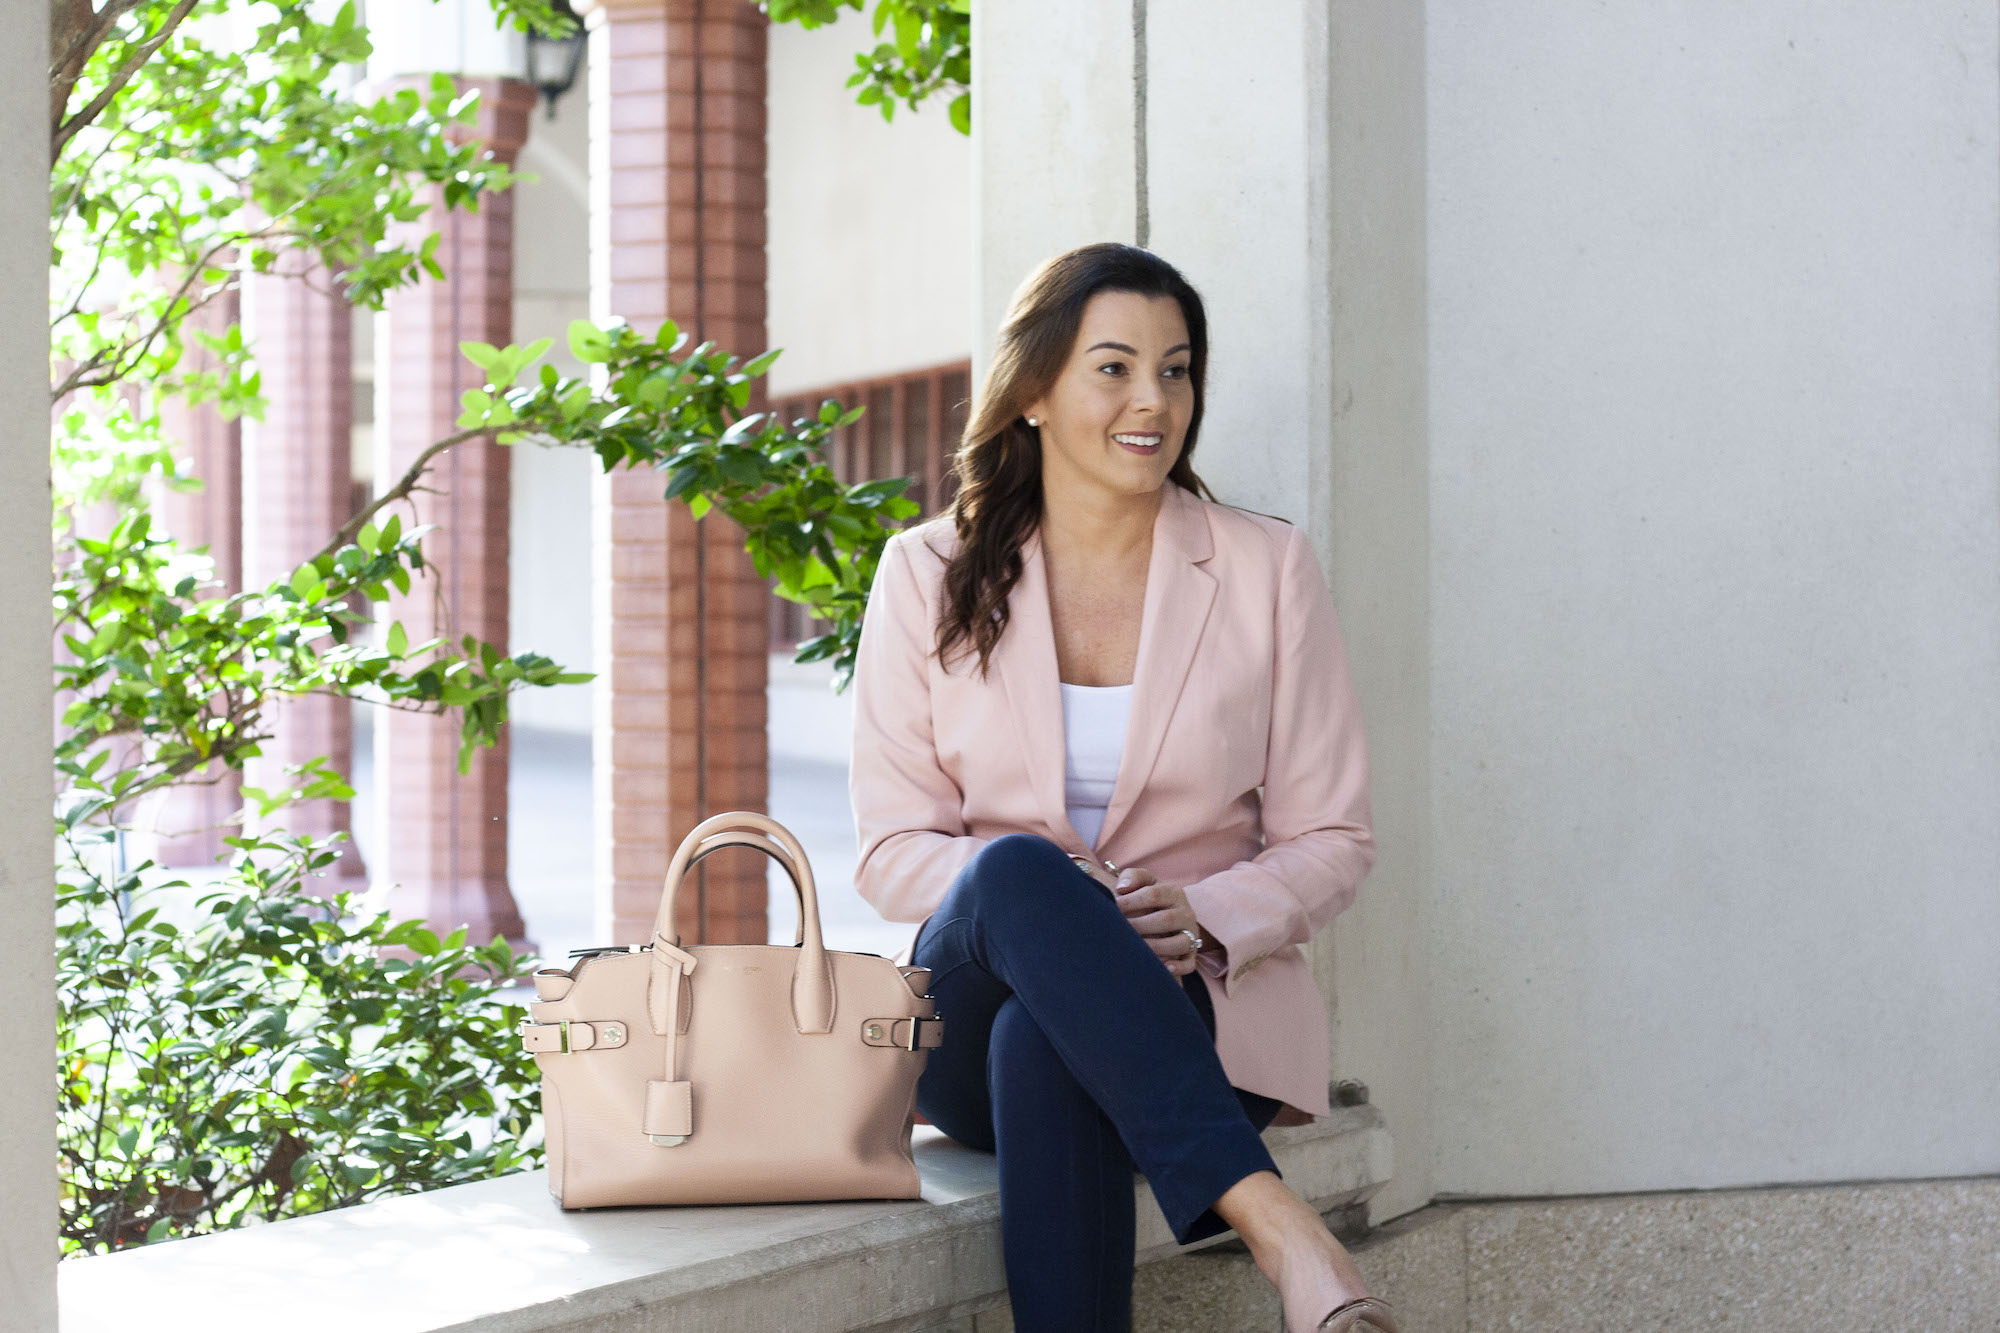 pale pink blazer outfit